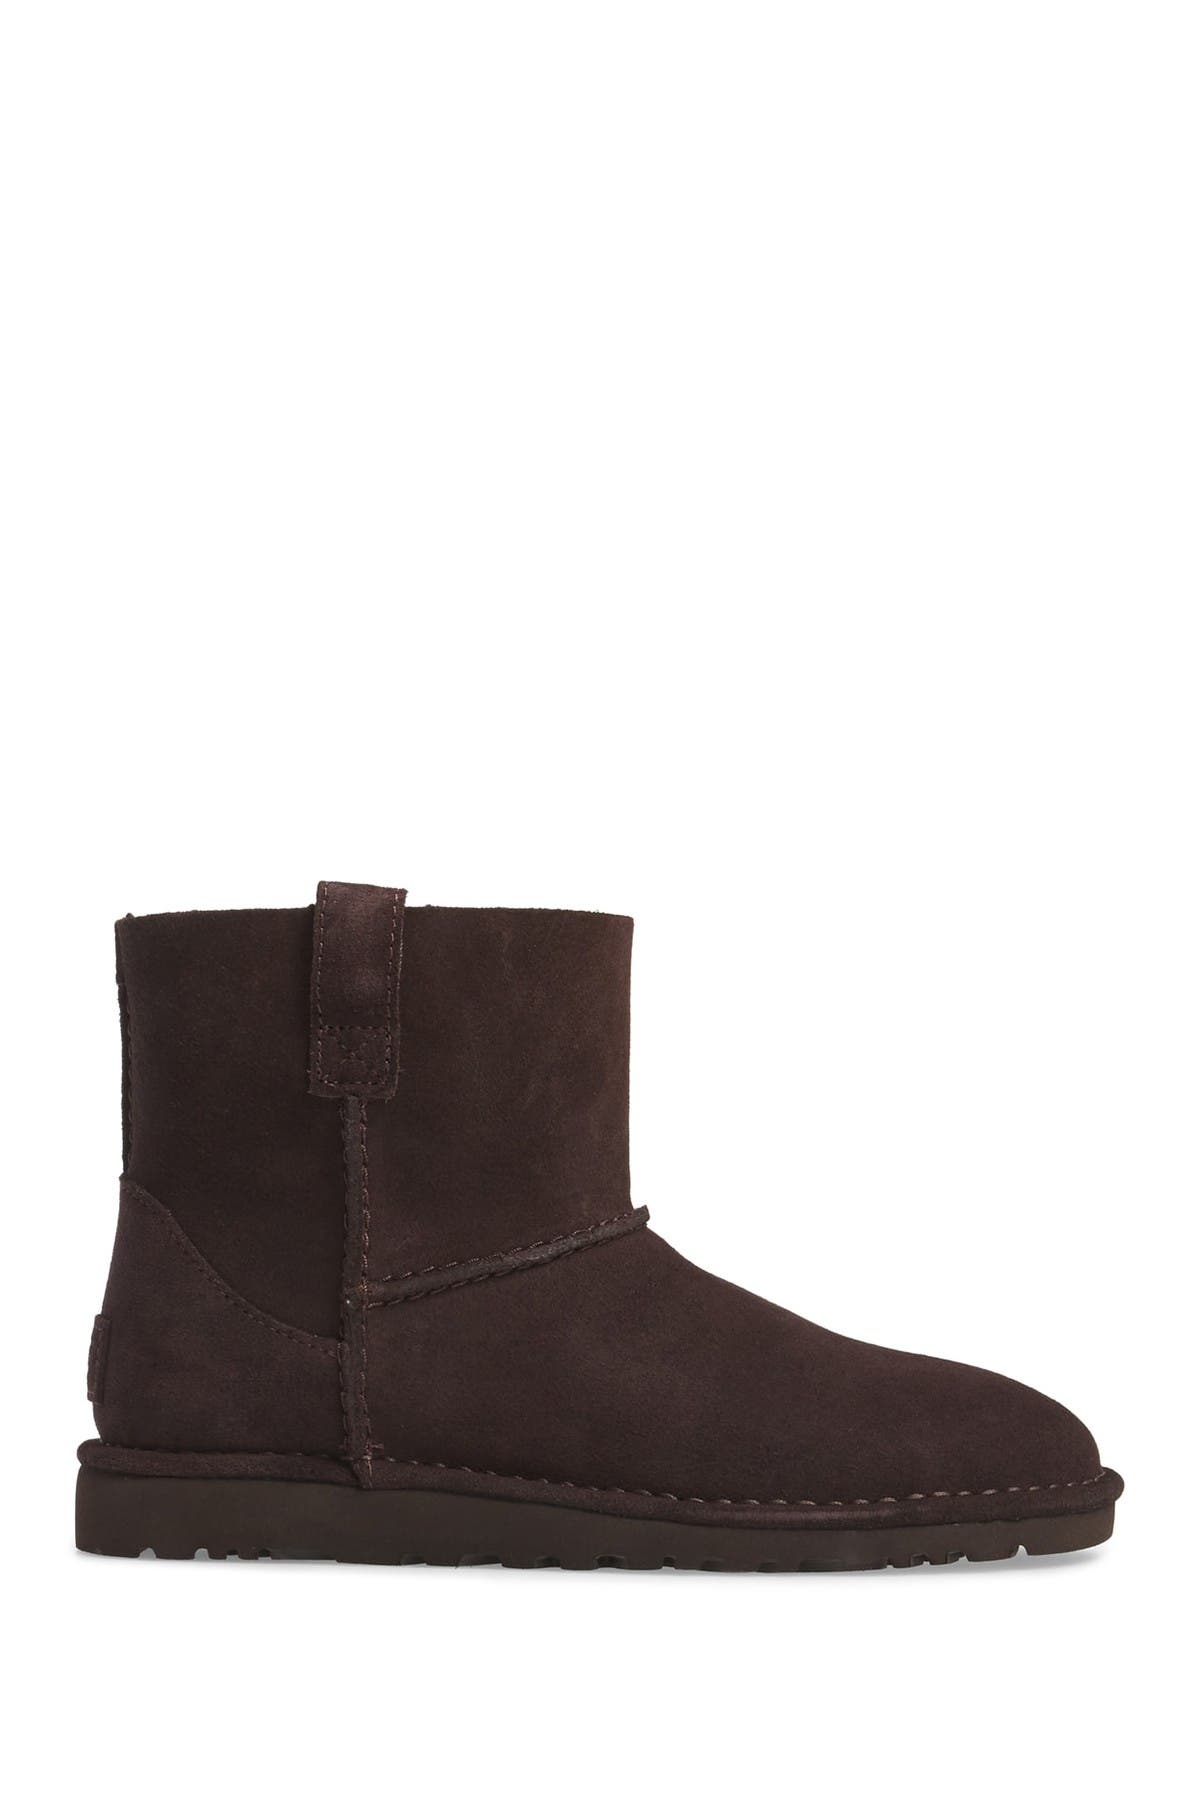 classic unlined leather bootie